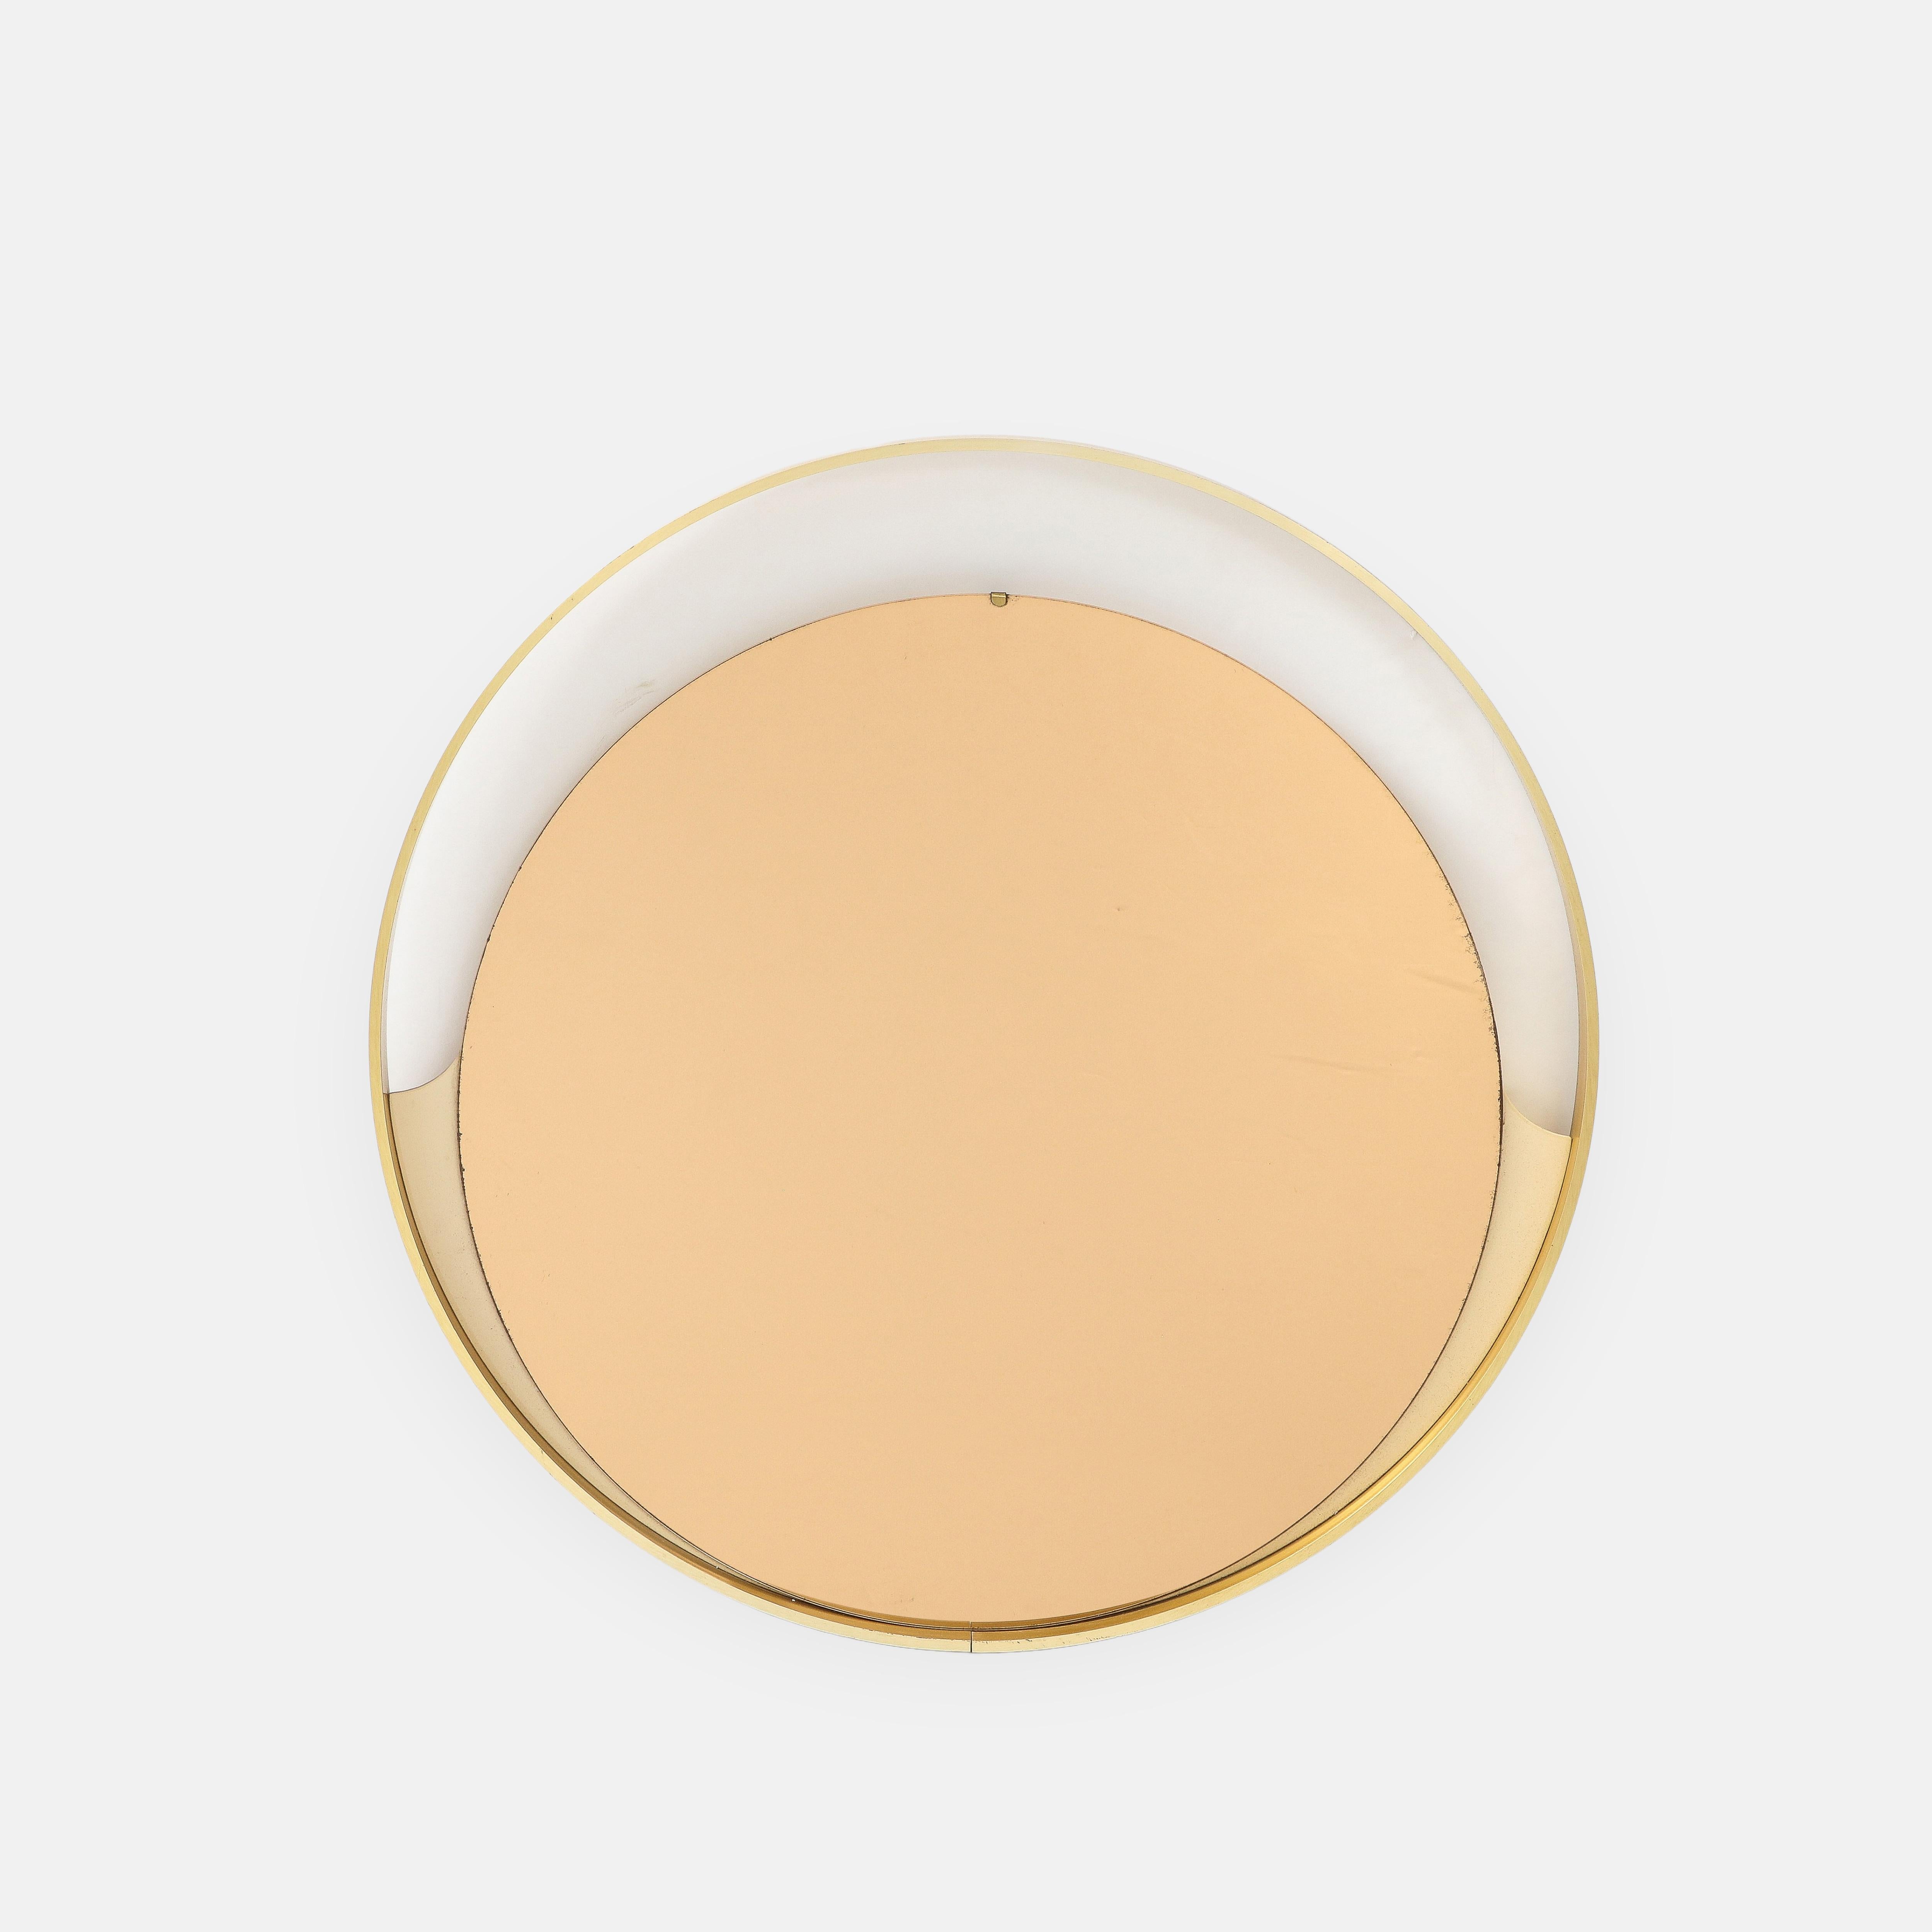 1970s Italian modernist round wall mirror with brushed gold or satin brass circular frame and smaller circular rose gold mirror mounted on lower half by lacquered ivory painted wood.  This stylish and chic mirror has lovely contrasting details